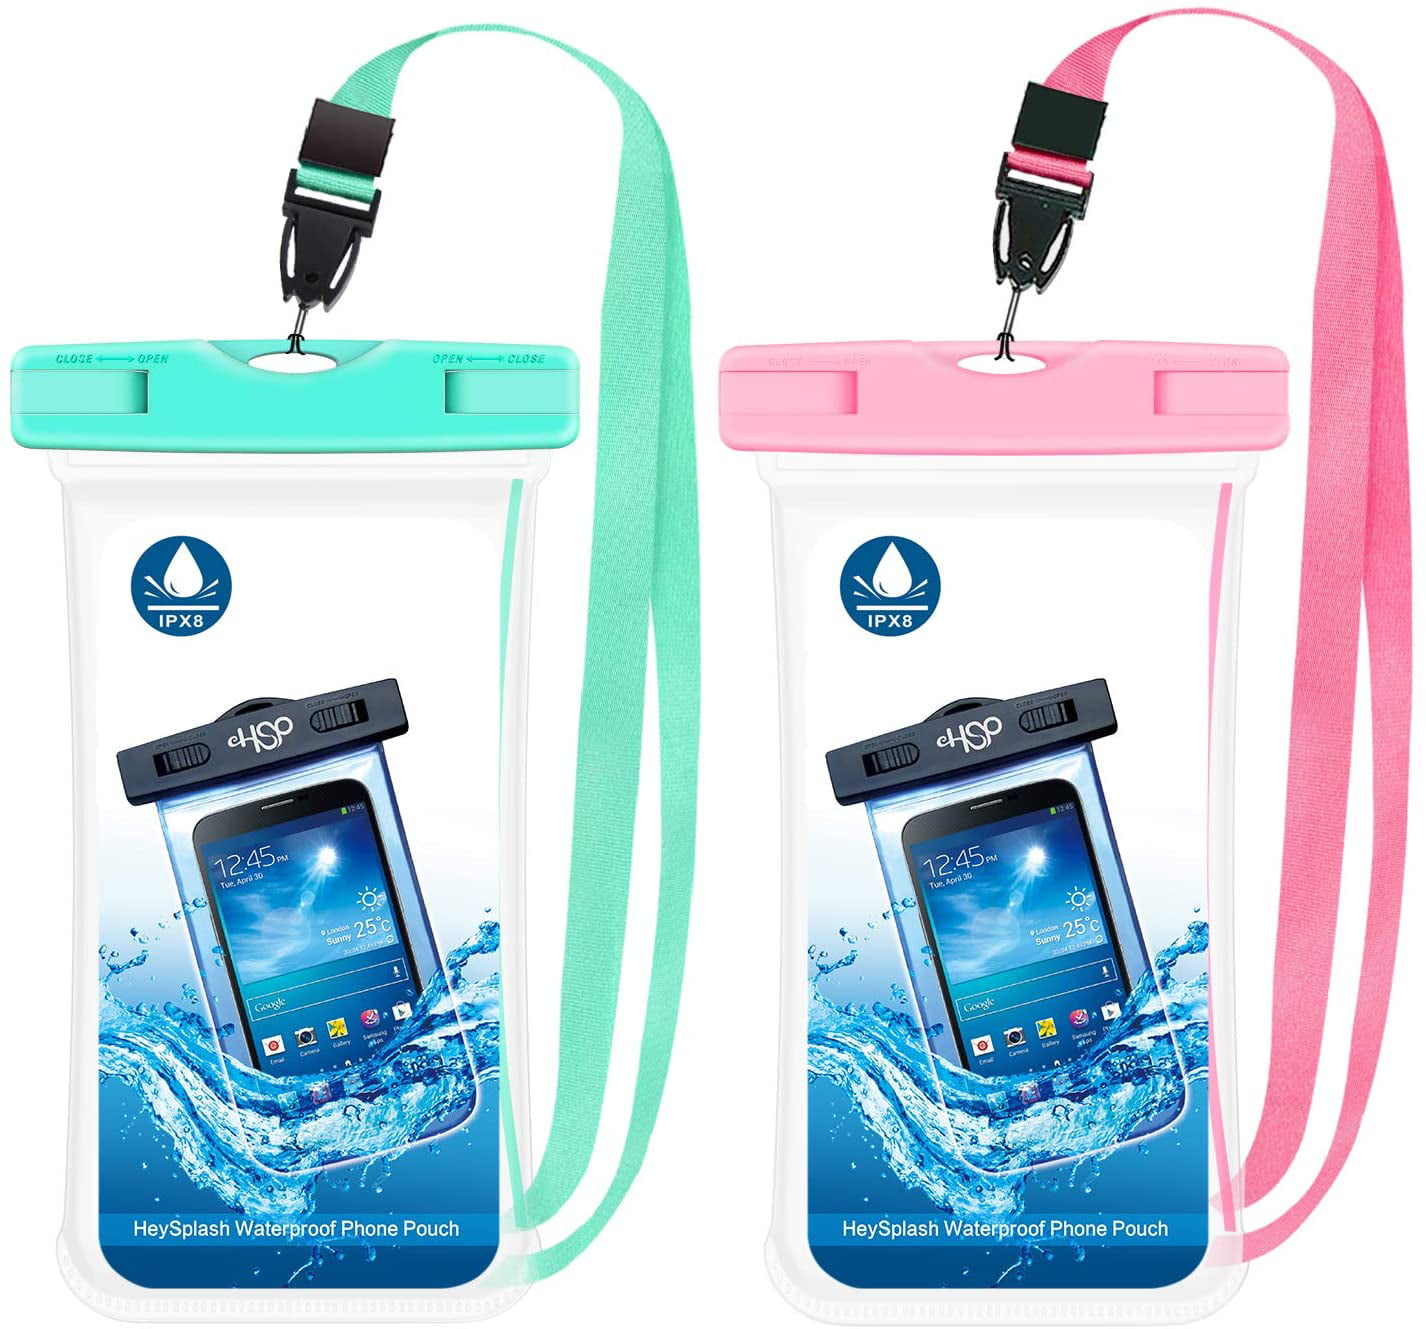 MoKo Waterproof Phone Pouch iPhone X/Xs/Xr 8/7/6s Plus GalaxyS10/S9 Underwater Waterproof Cellphone Case Dry Bag with Lanyard Compatible with iPhone 11/11 Pro /11 Pro Max S8 Plus/S7 Edge 